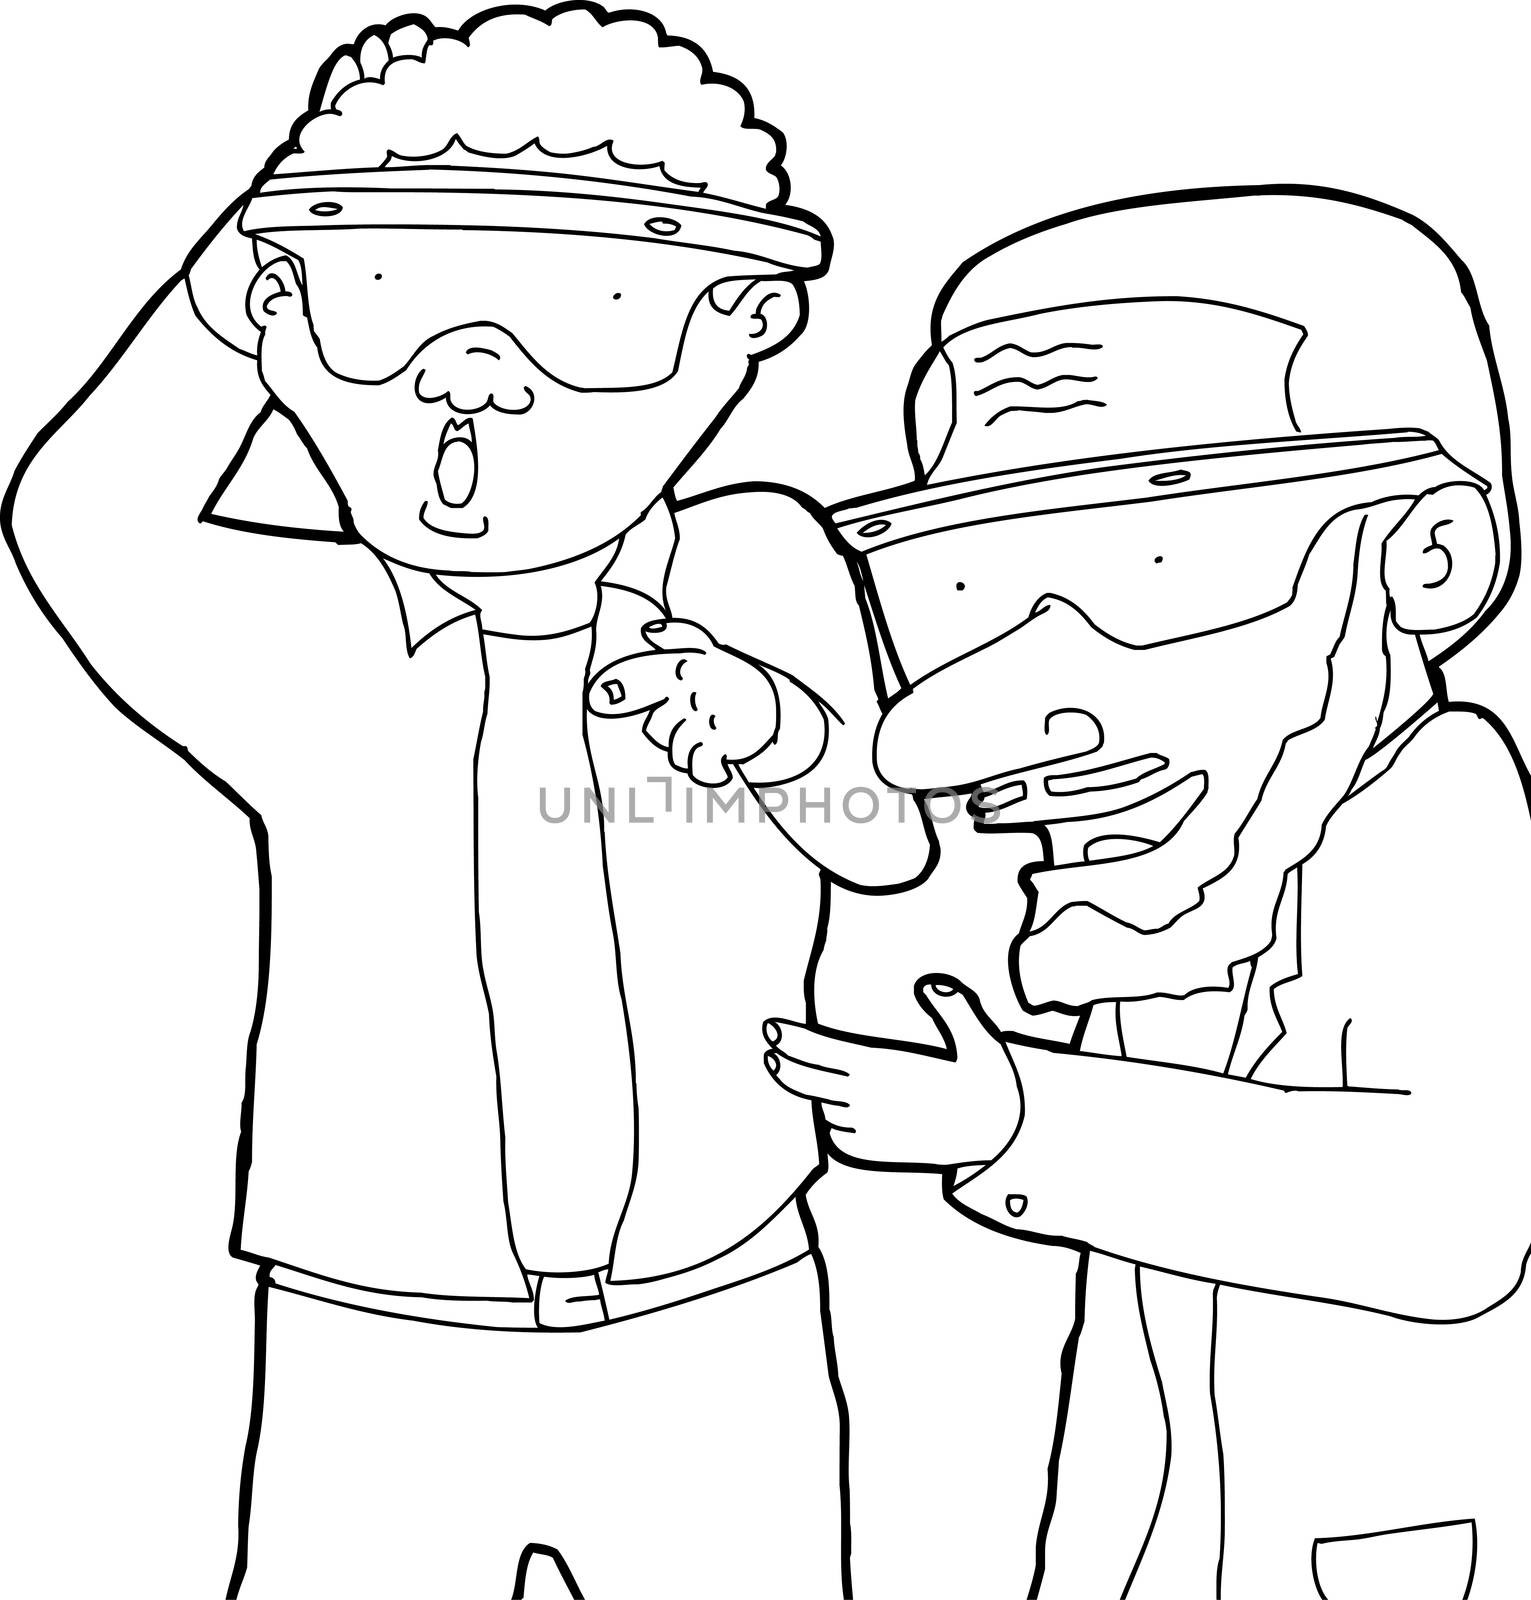 Outline of two men in virtual reality glasses